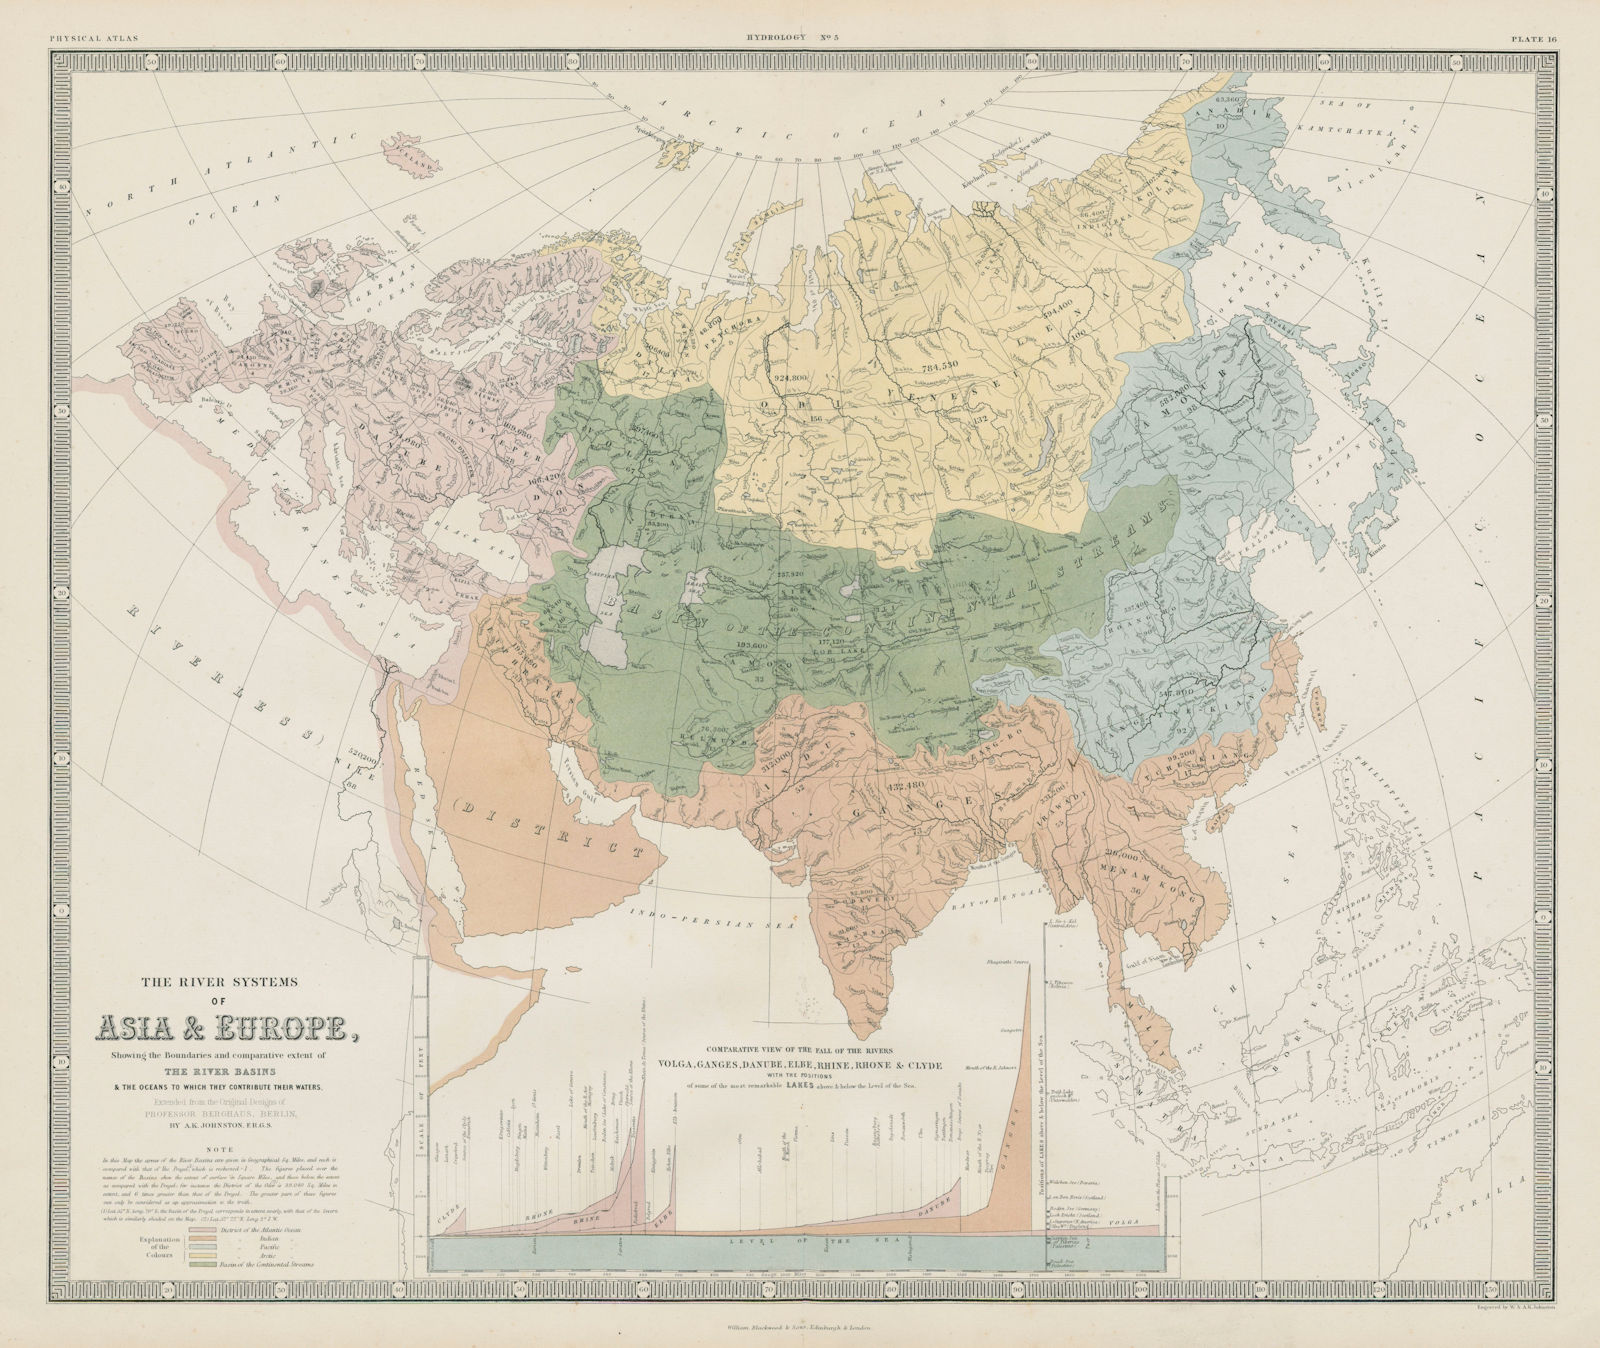 Associate Product Asia & Europe river systems. Watersheds drainage basins. JOHNSTON 1856 old map